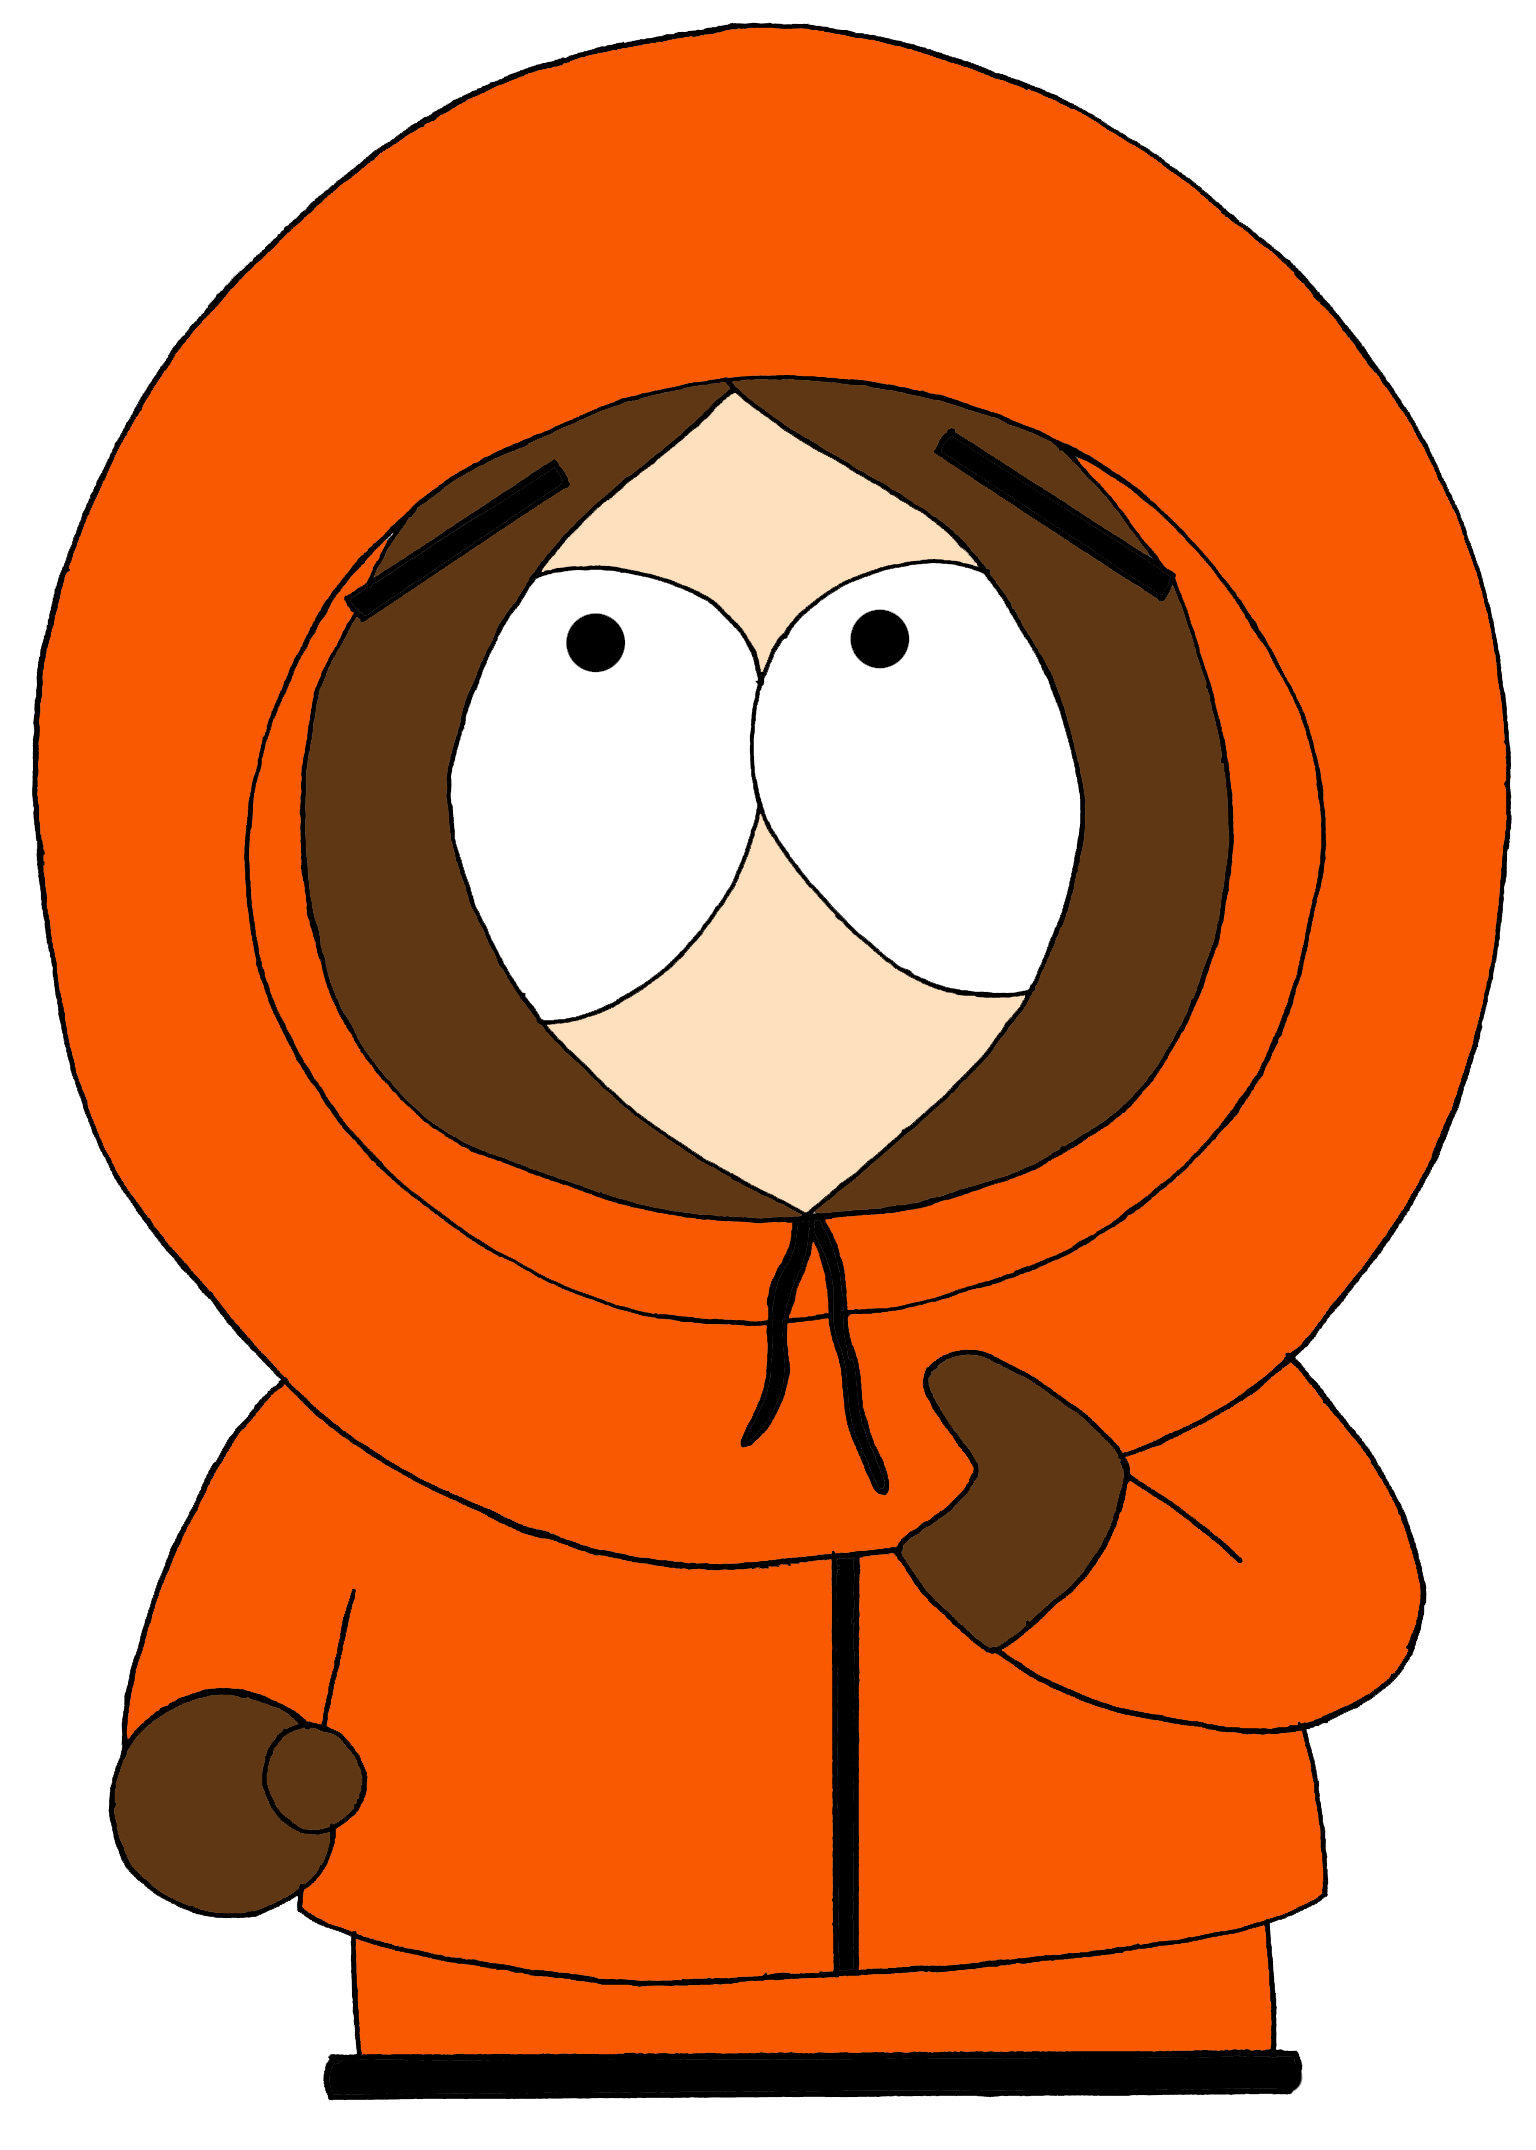 South Park Action Poses - Kenny 22 by megasupermoon on DeviantArt. source: ...